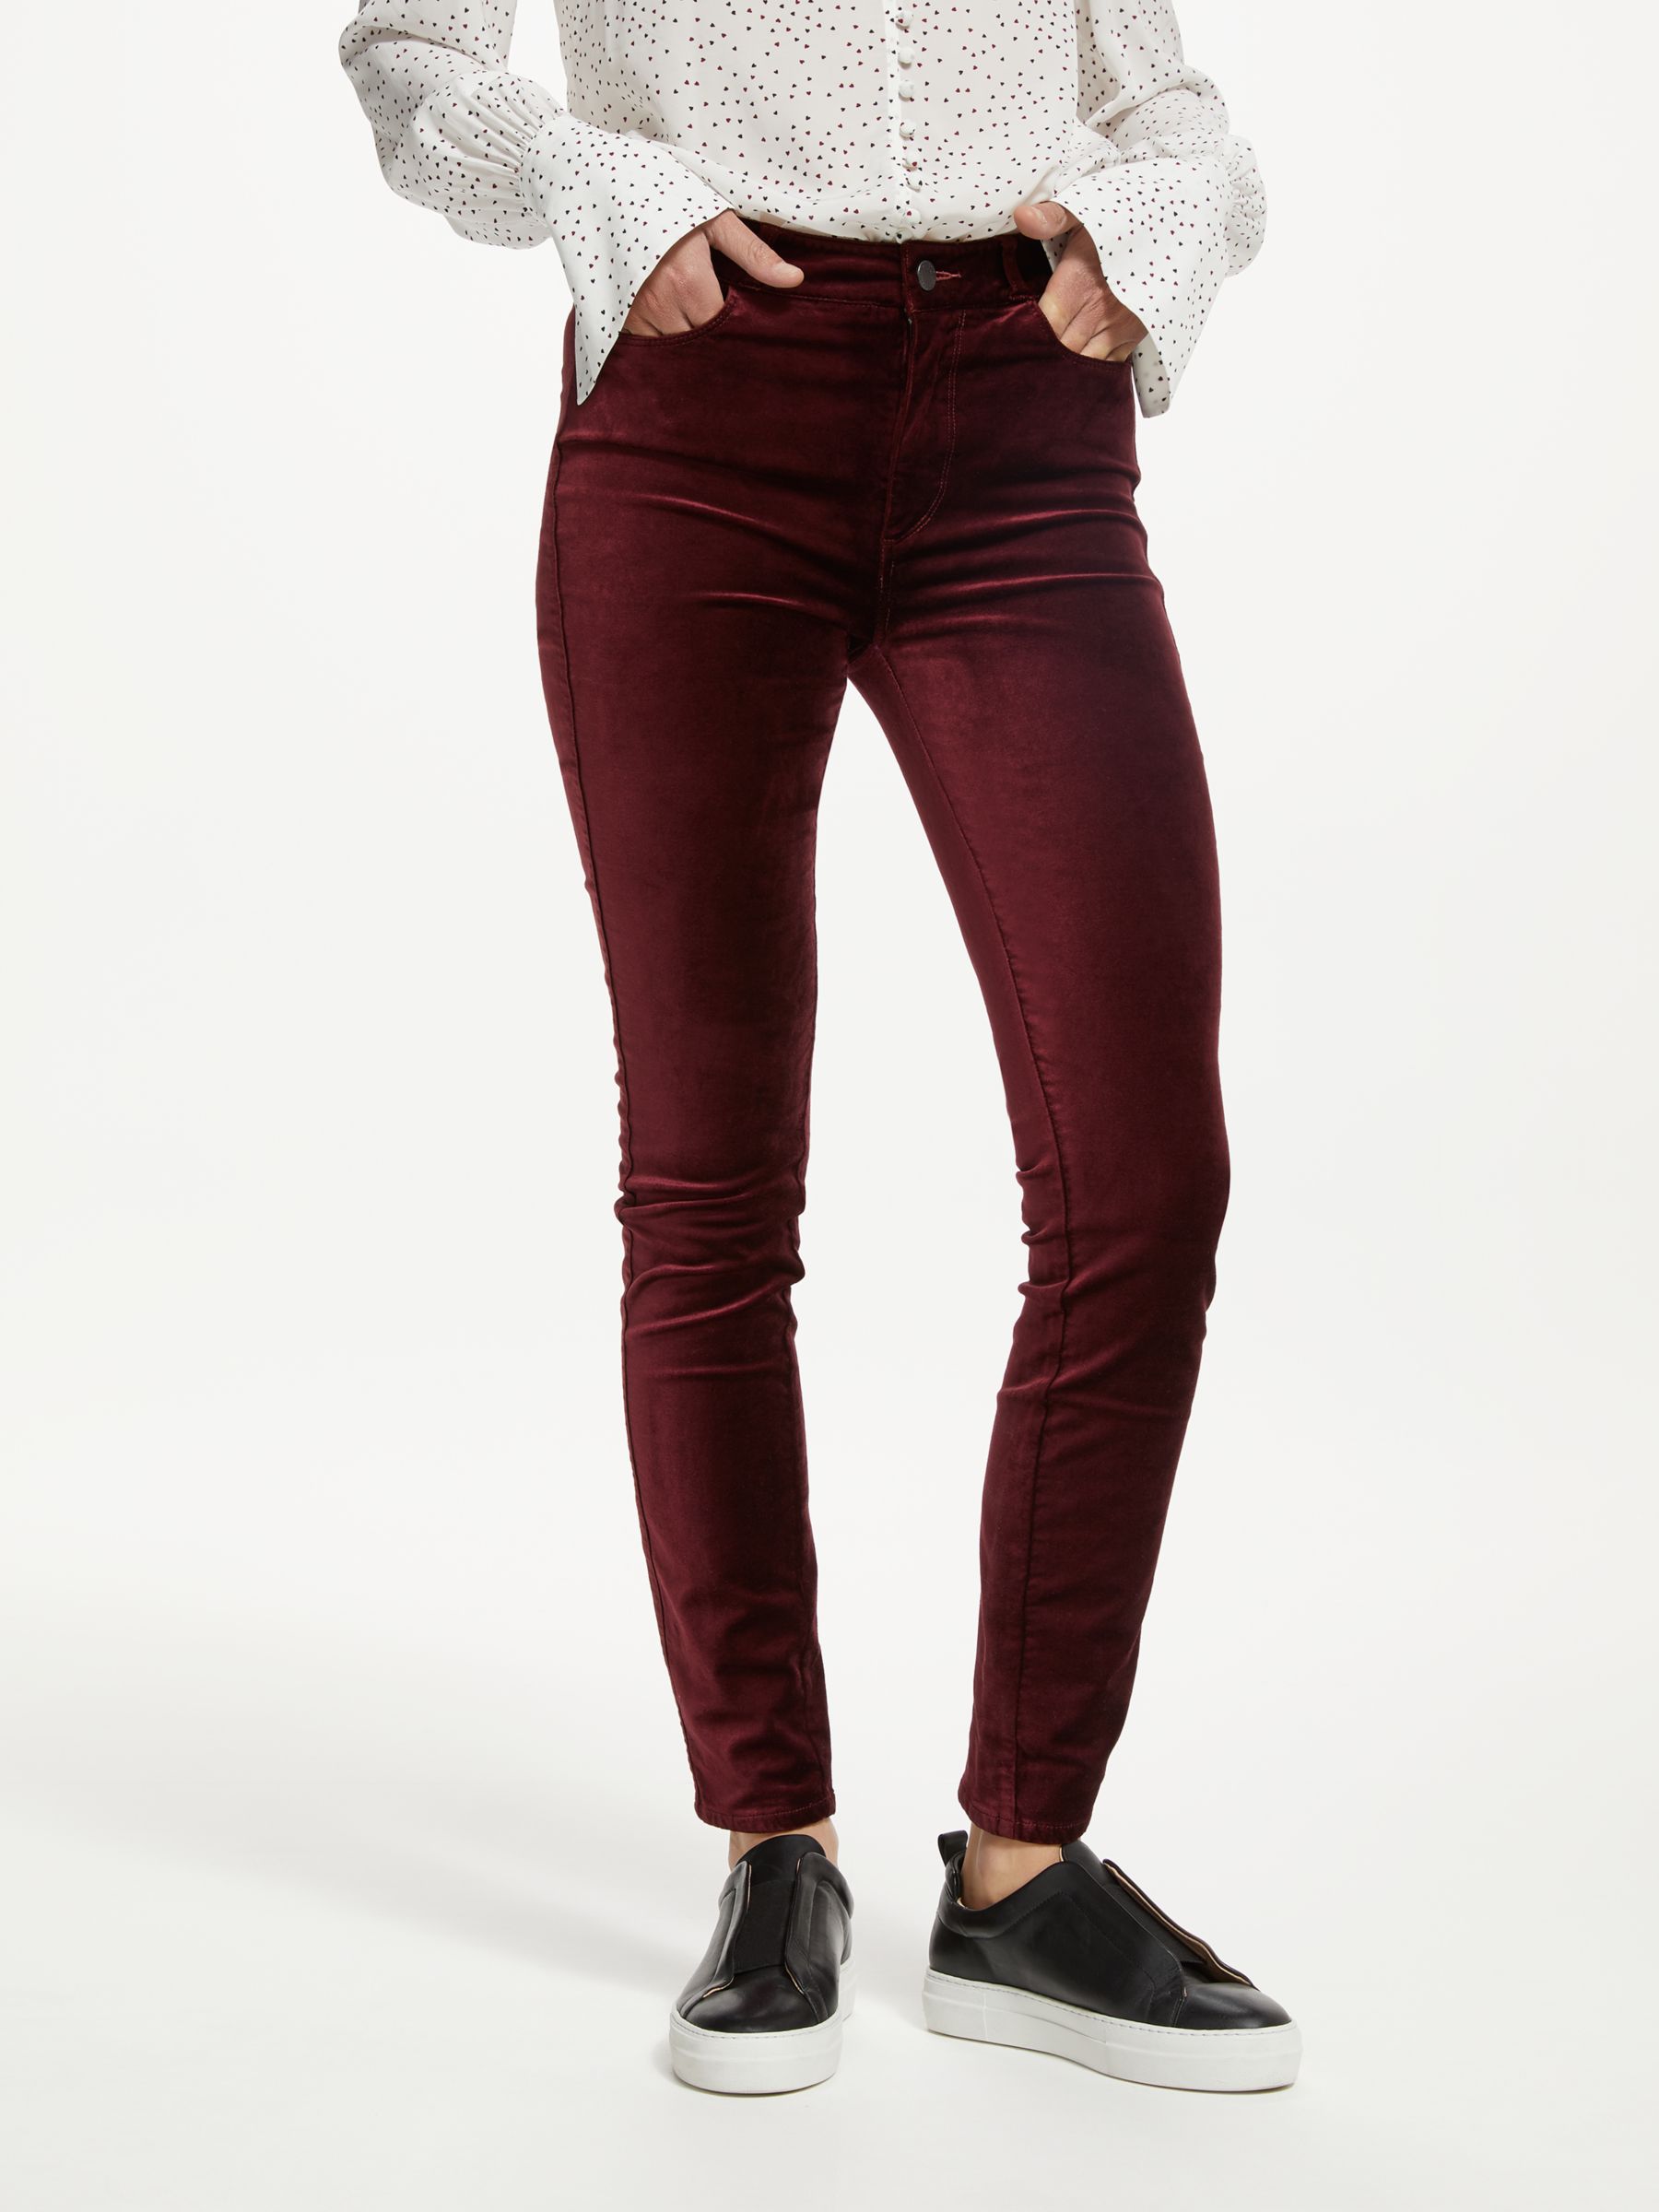 paige hoxton high rise skinny